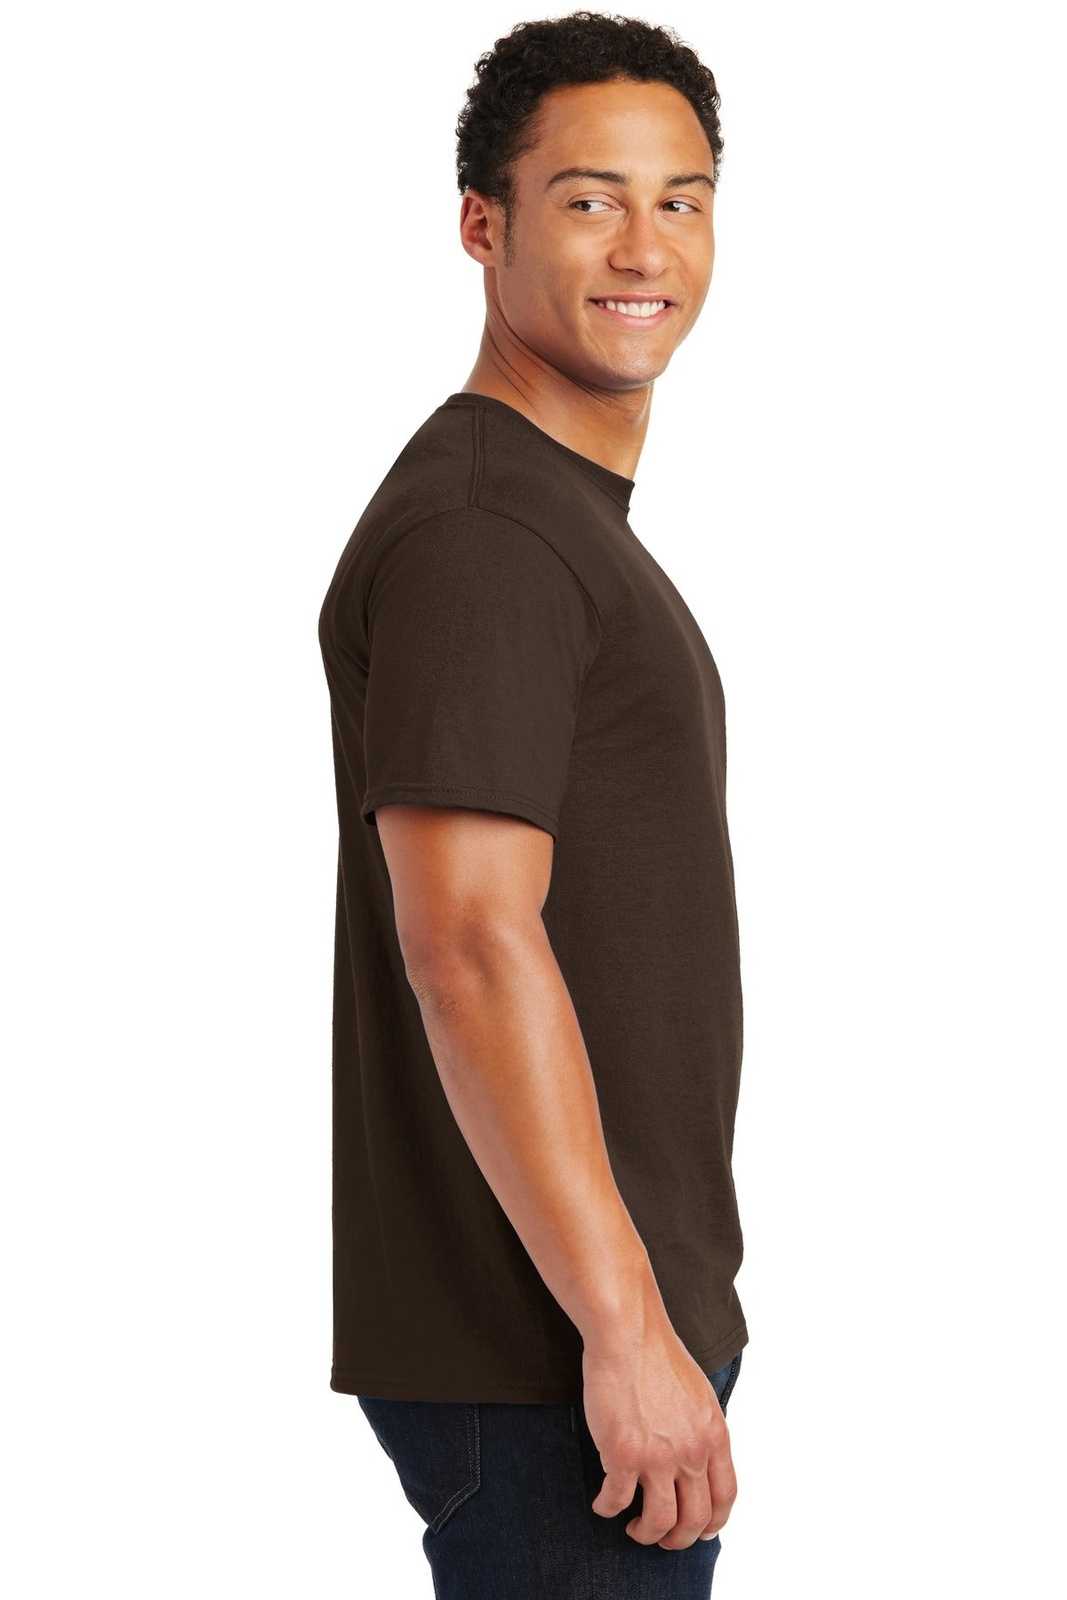 Jerzees 29M Dri-Power Active 50/50 Cotton/Poly T-Shirt - Chocolate - HIT a Double